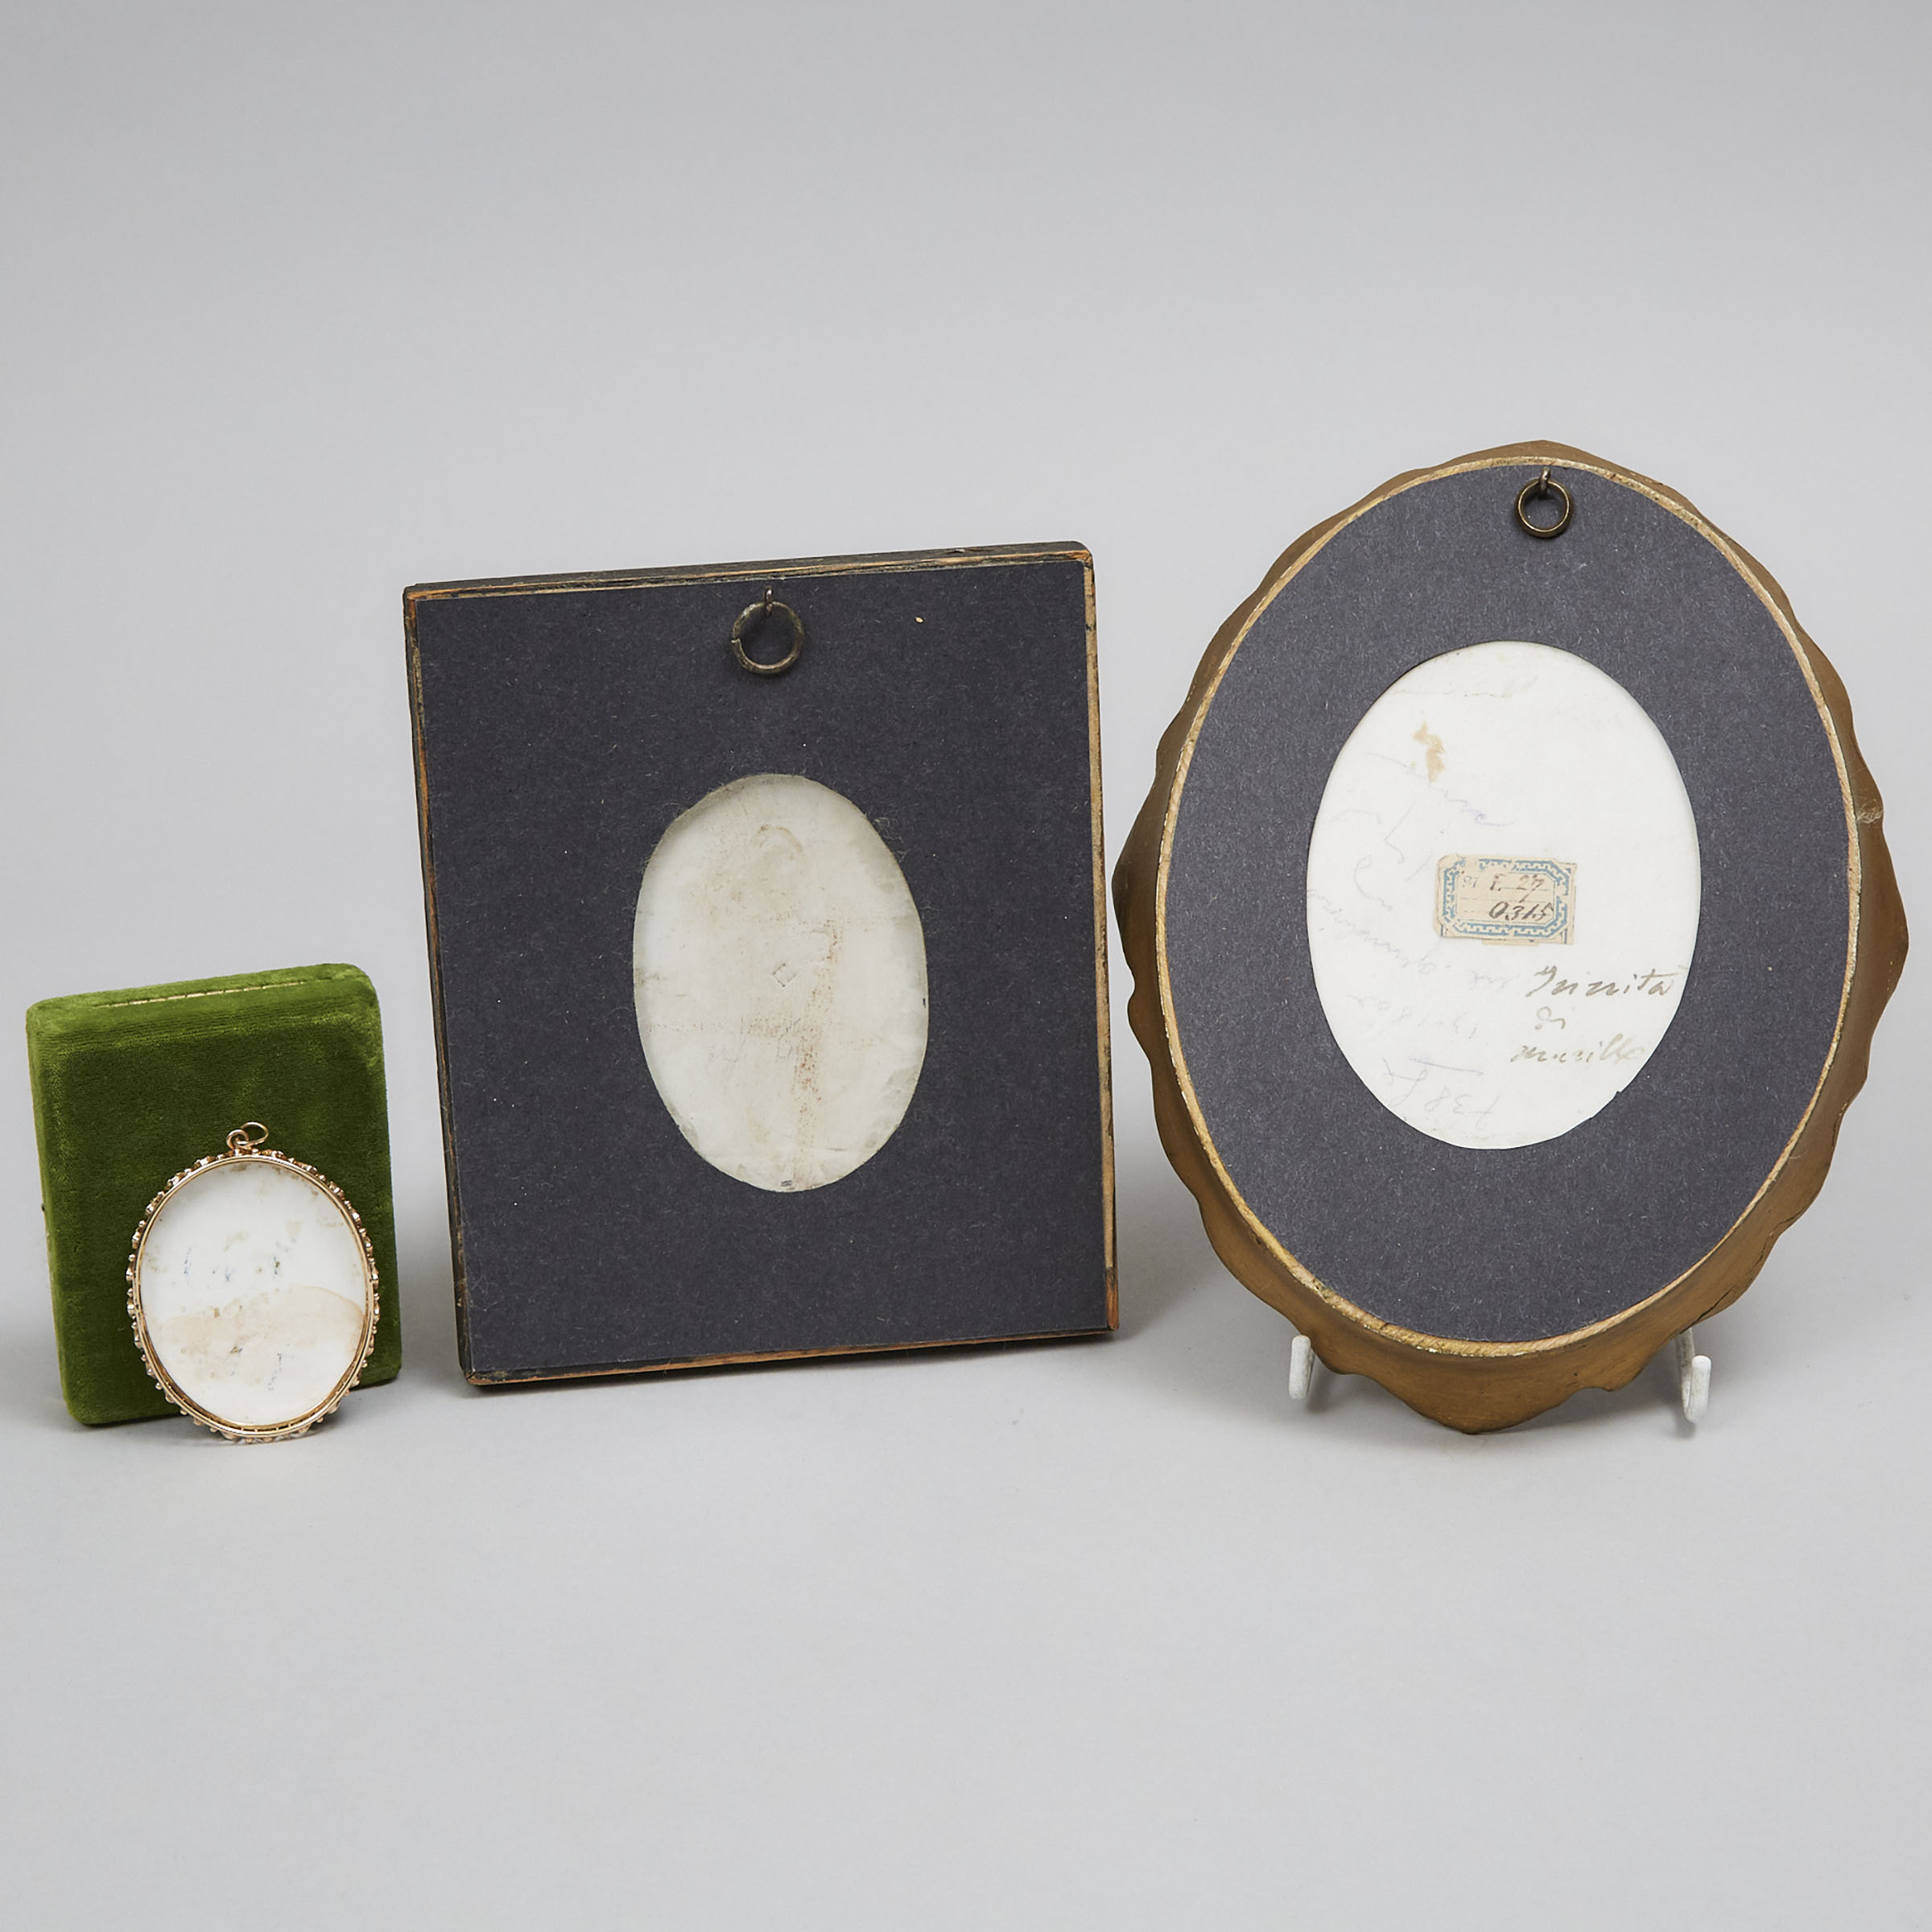 Three Oval Portrait Miniatures on Porcelain of the Virgin Mary, 19th and 20th centuries